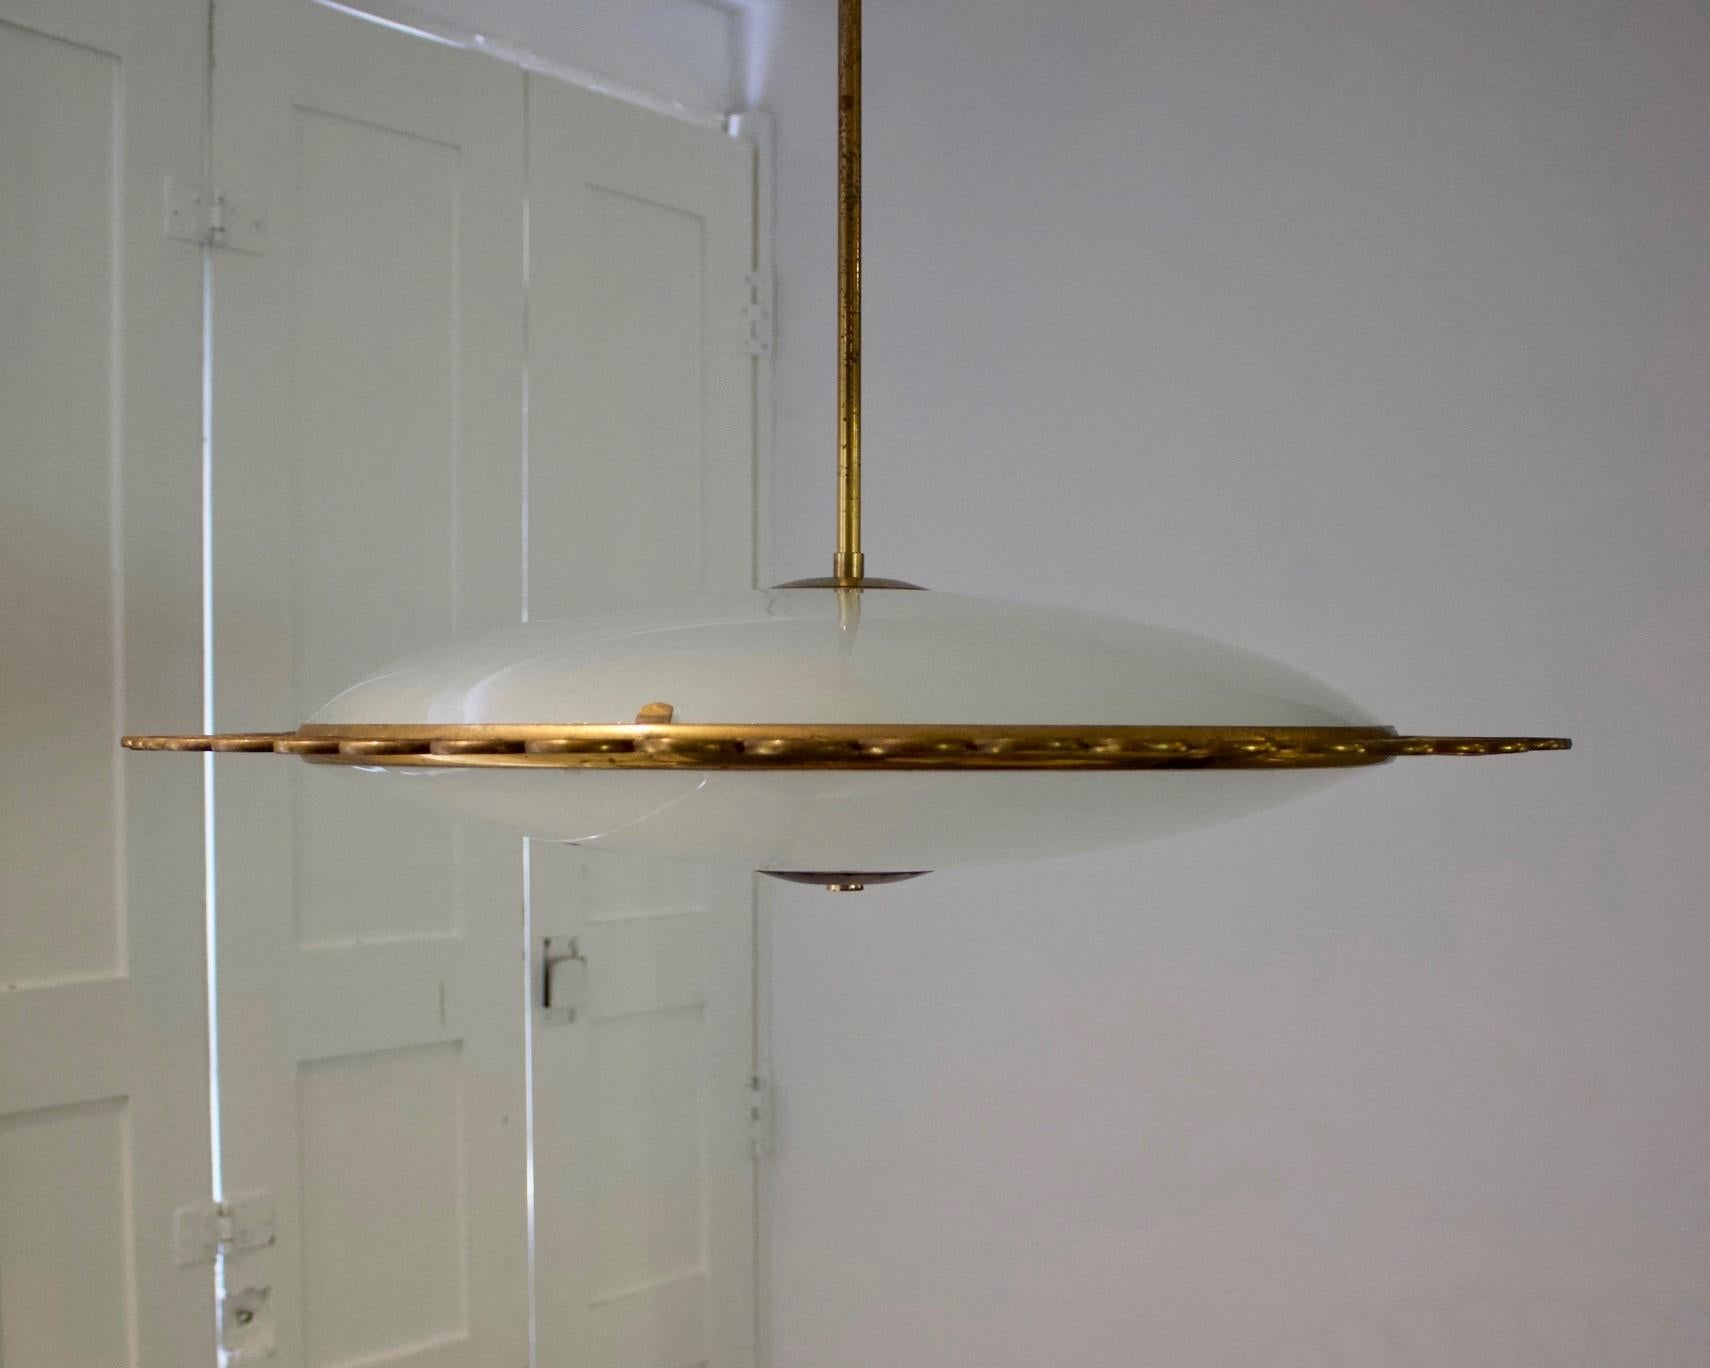 Italian glass pendant light with decorative brass frame, mid-20th century. 

A delicate fixture made up of two dishes of opaque glass held by a decorative brass frame. The slim flying saucer shape is very much in the style of Pietro Chiesa for